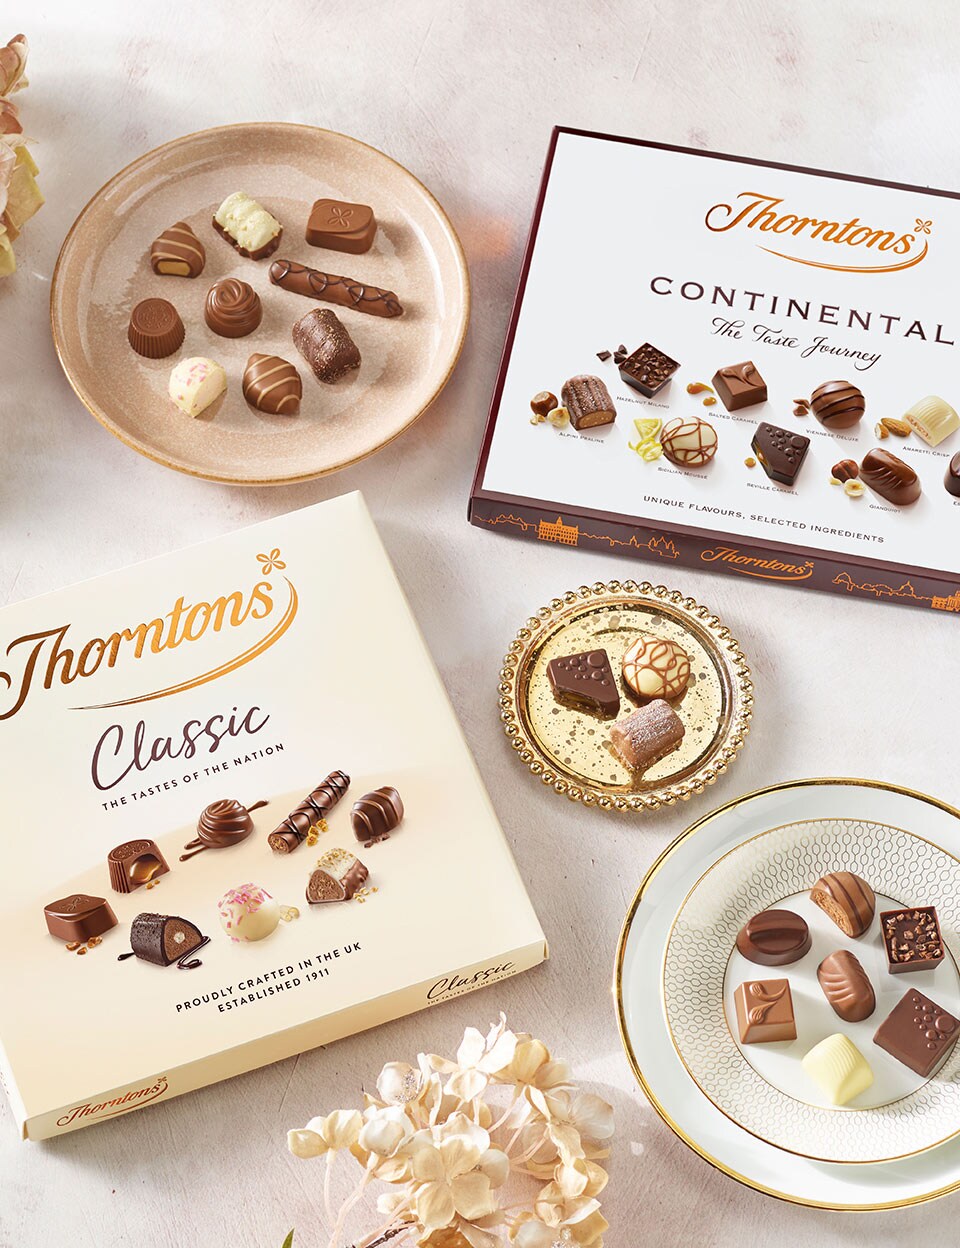 Boxes of Continental and Classic Collection chocolates on a table with plates of the assorted chocolates from the respective boxes.